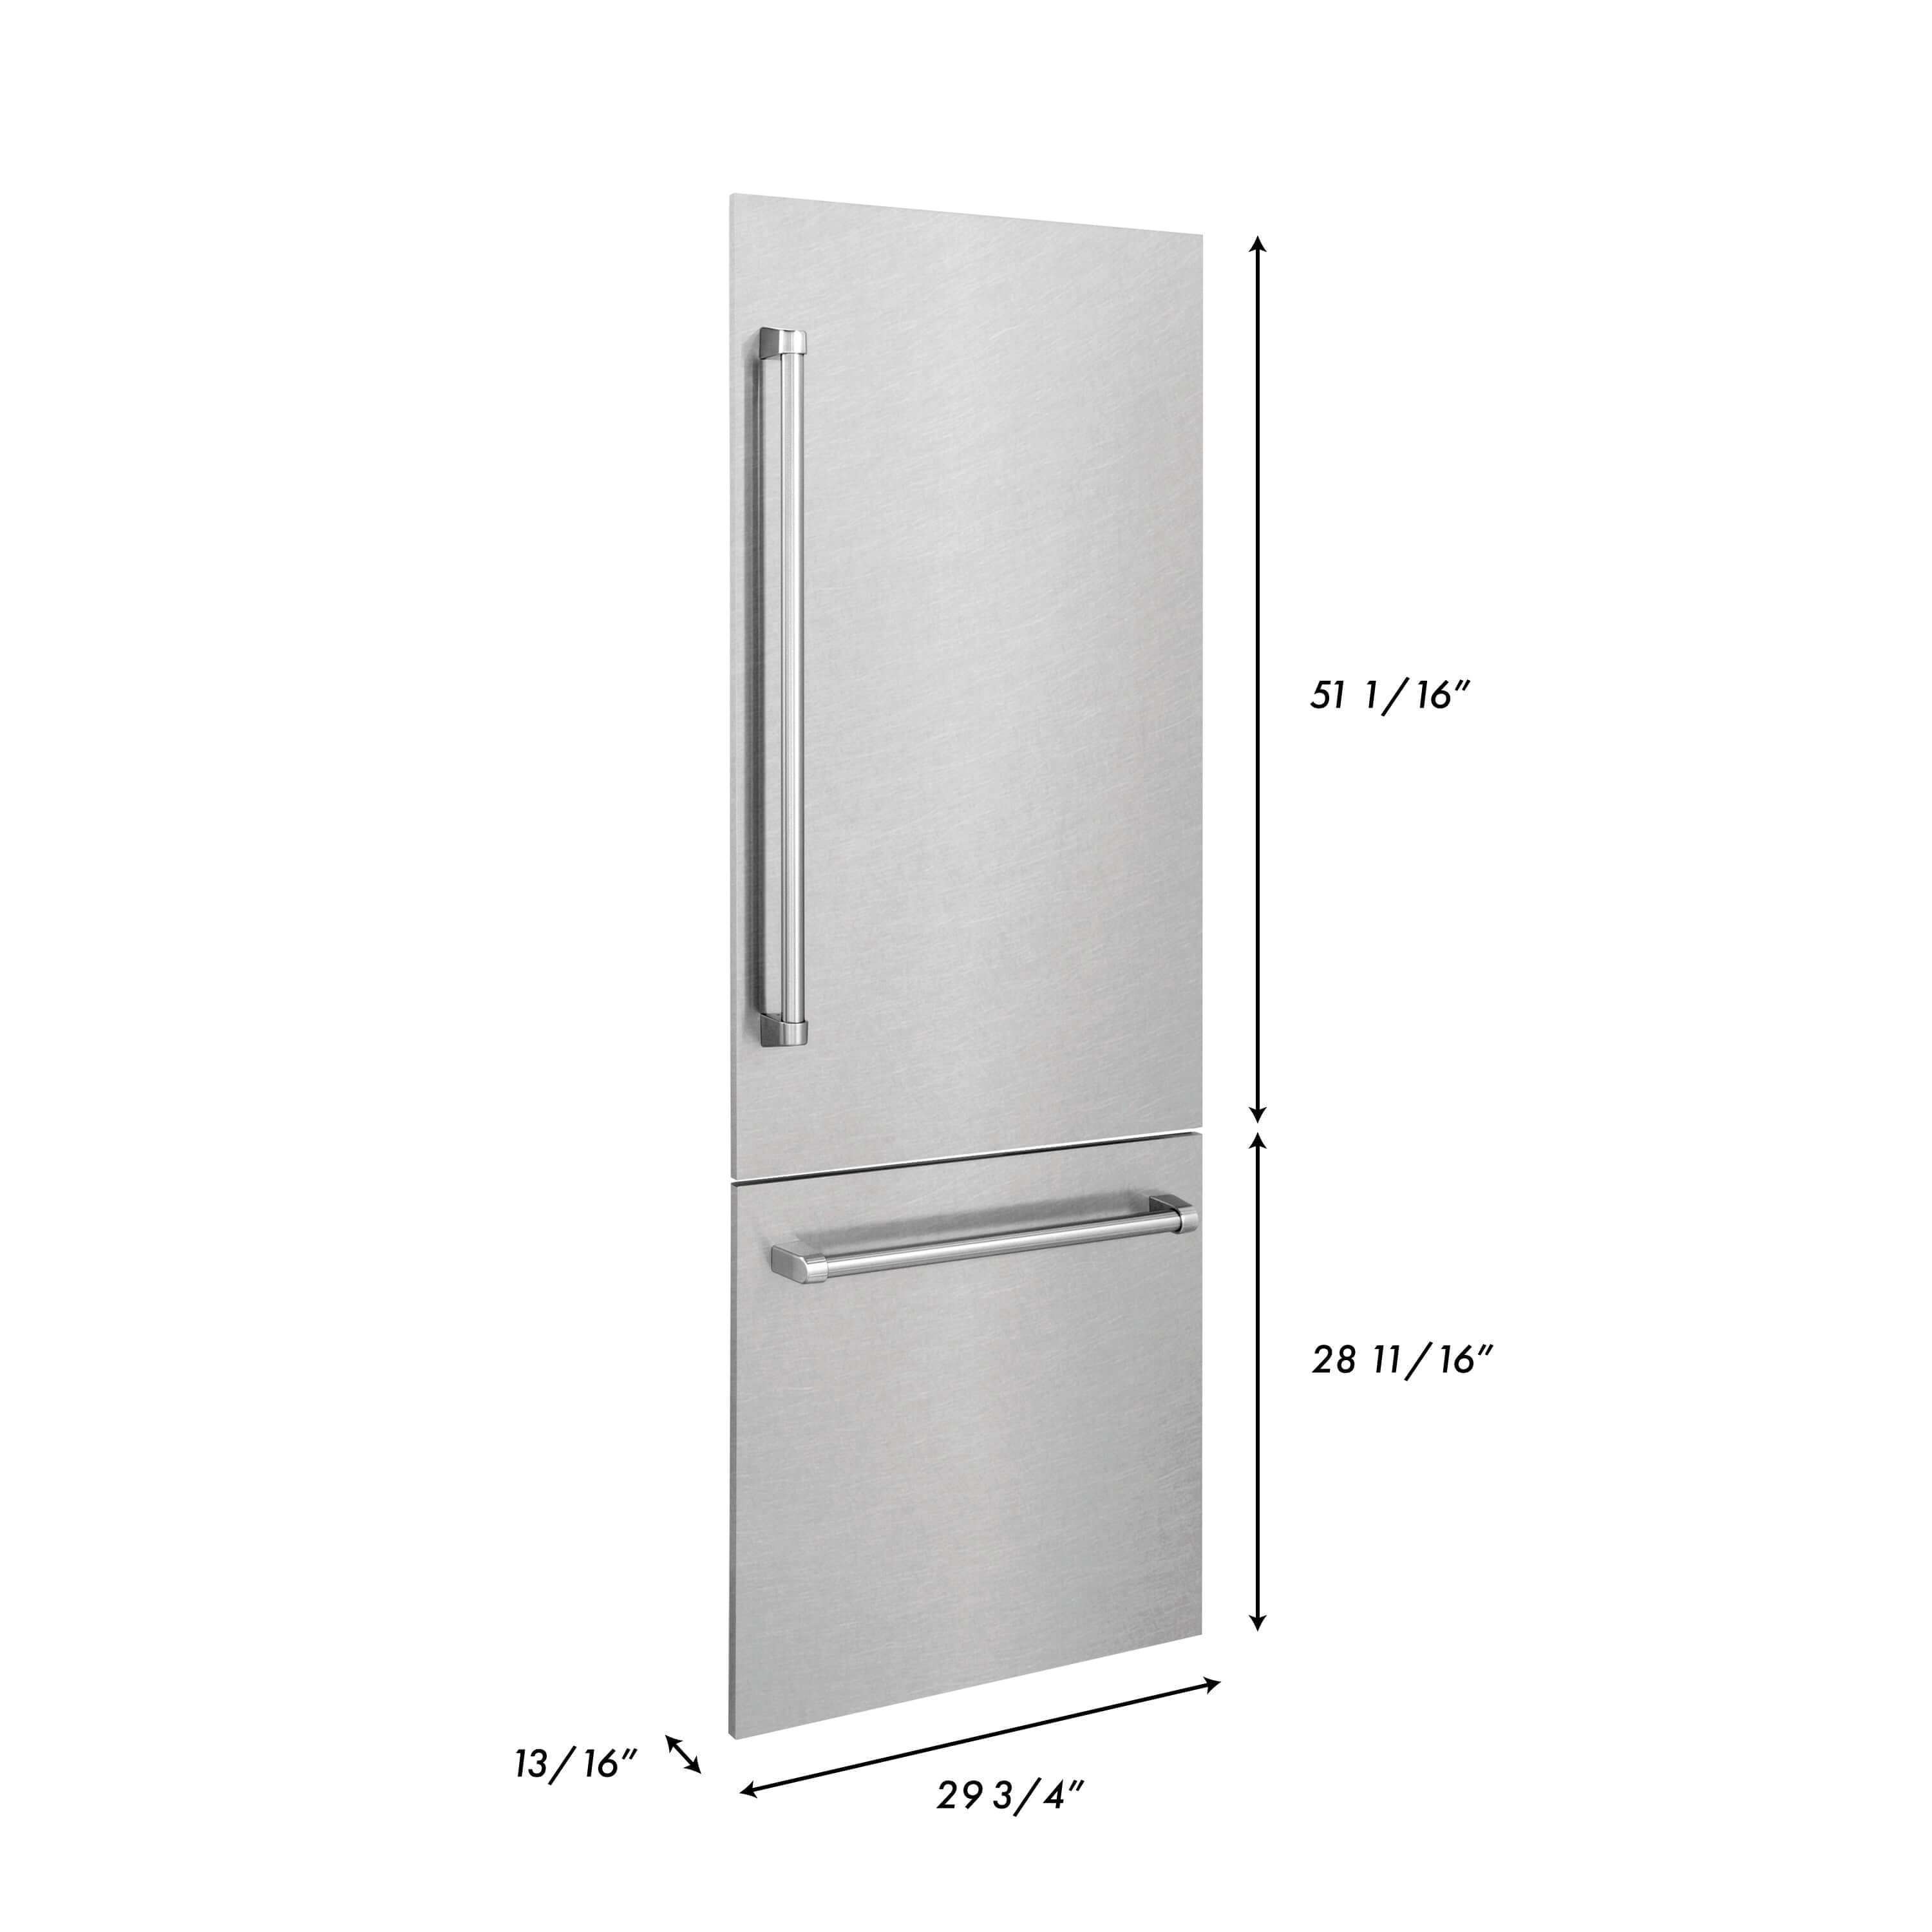 Panels & Handles Only- ZLINE 30 in. Refrigerator Panels in Fingerprint Resistant Stainless Steel for a 30 in. Built-in Refrigerator (RPBIV-SN-30) dimensional diagram with measurements.